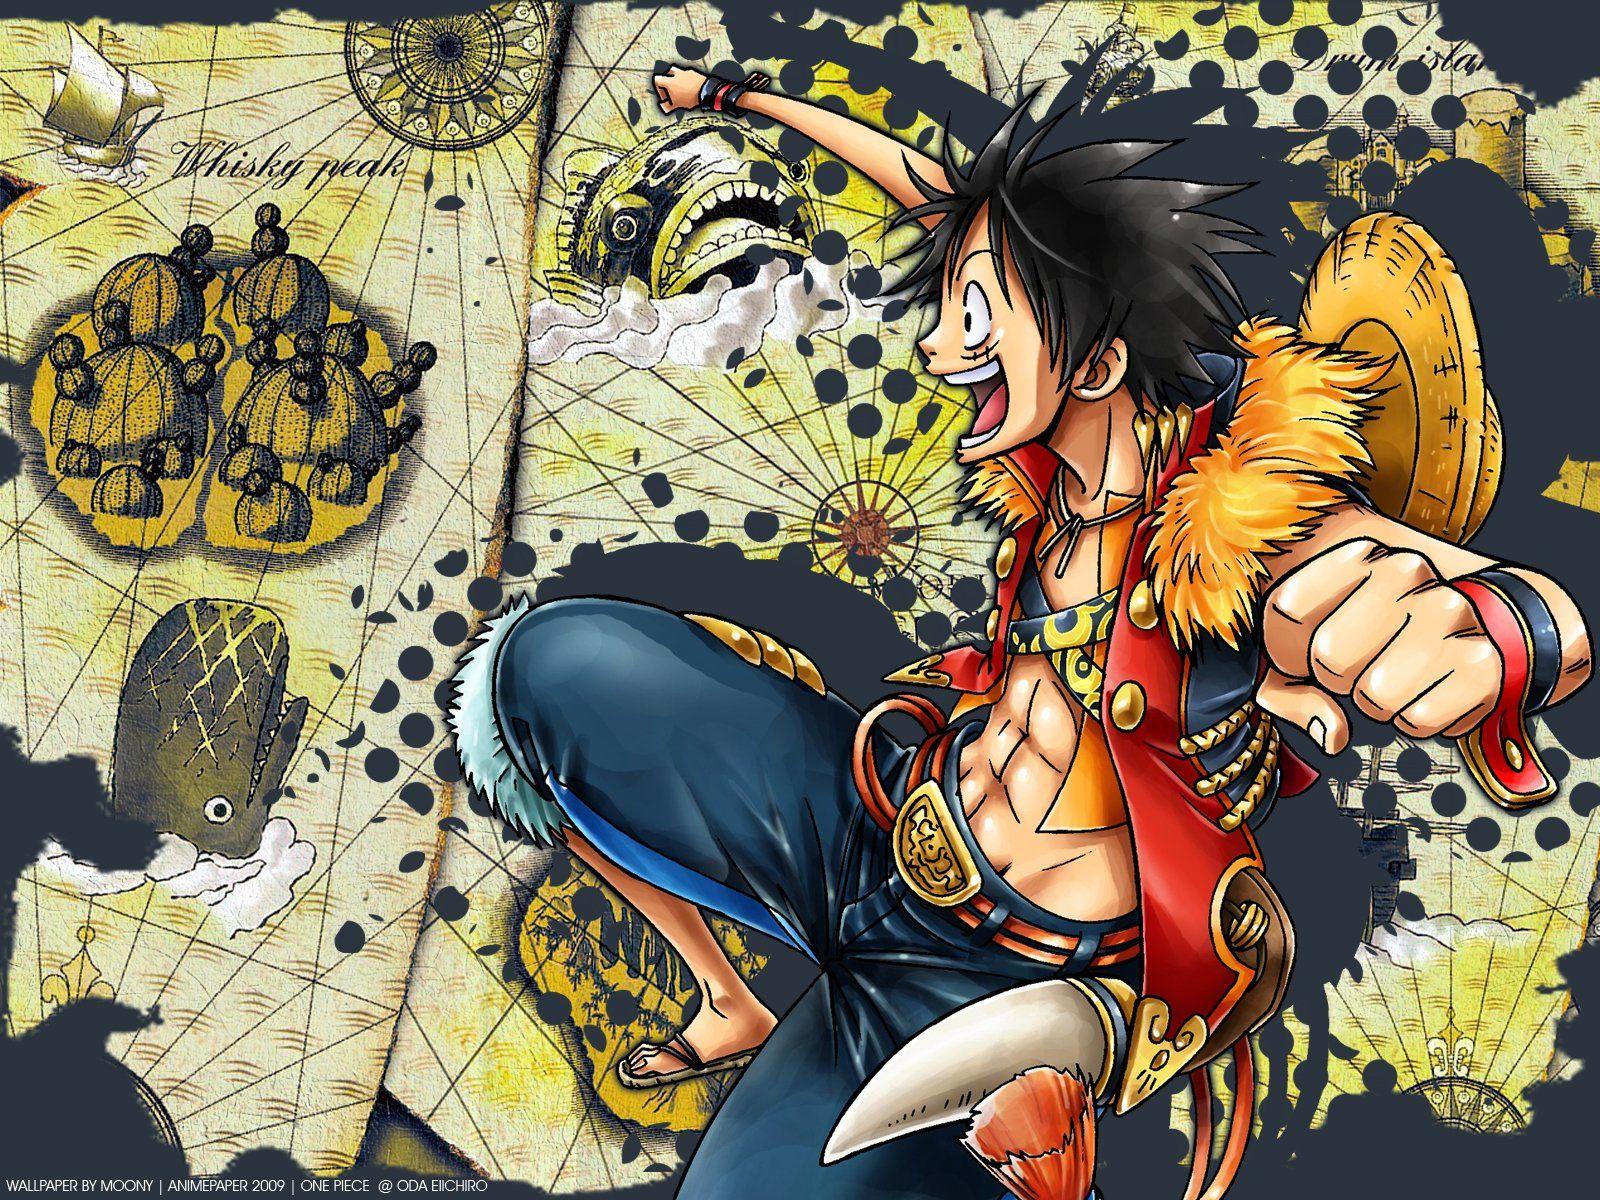 One Piece Luffy New World Wallpaper Image On Wallpaper 1080p HD